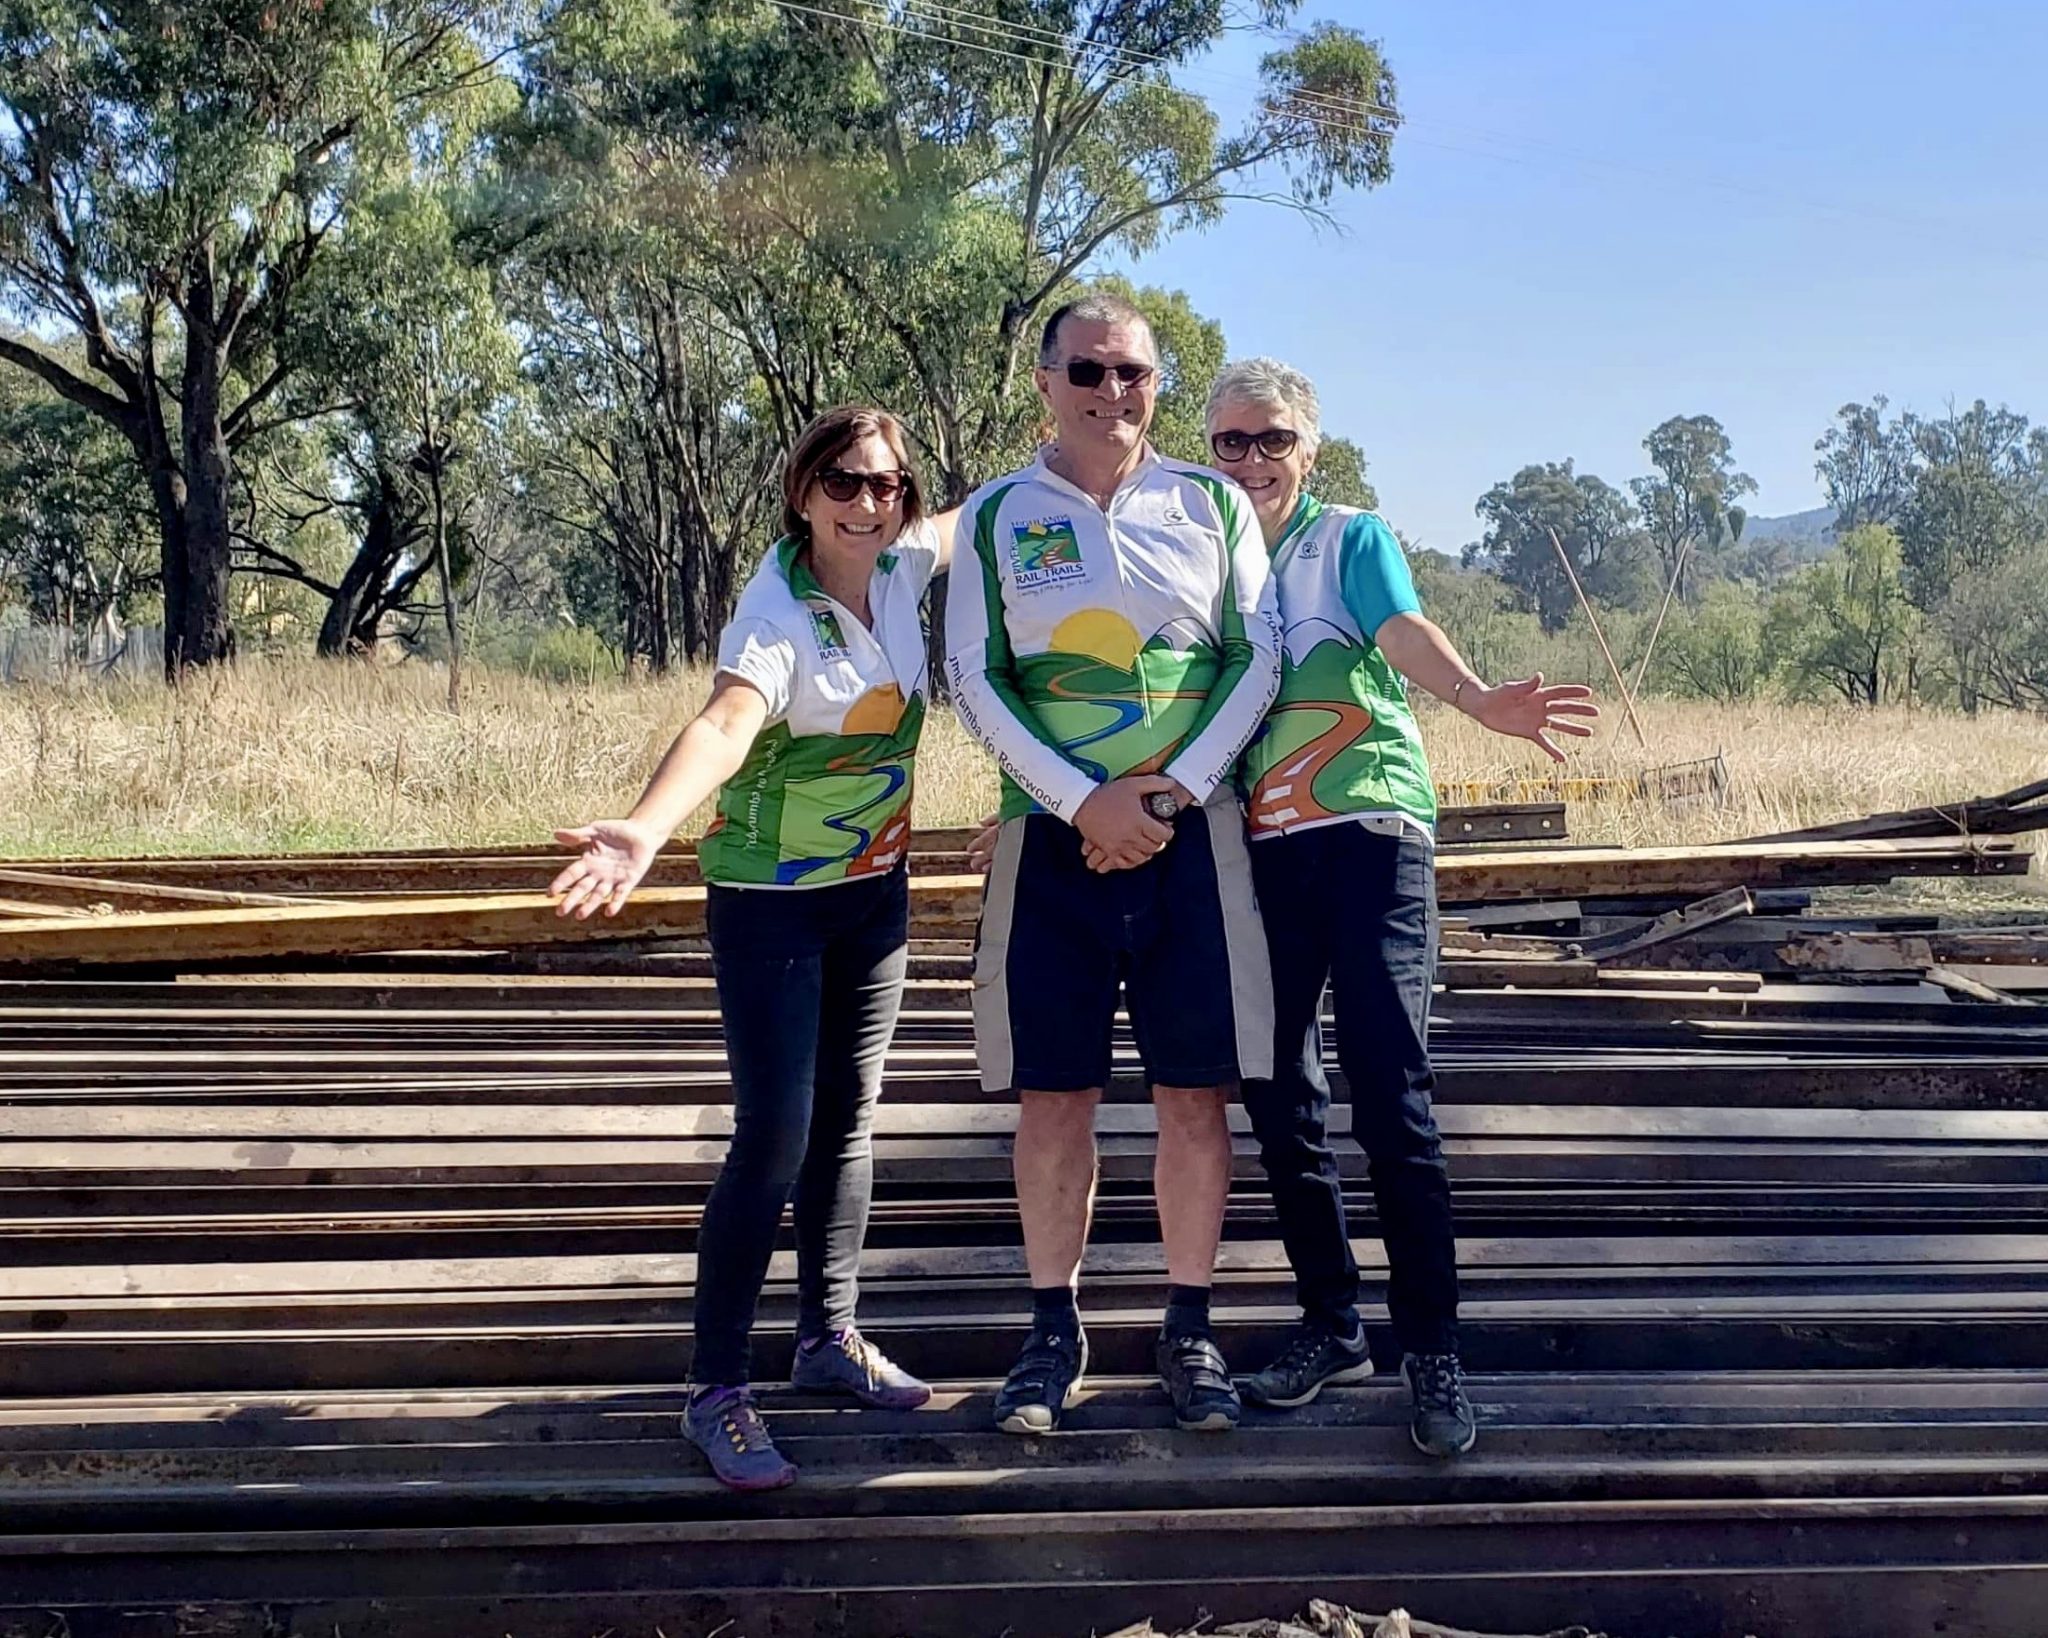 A happy day with the official turning of the sod of the Tumbarumba to Rosewood Rail Trail